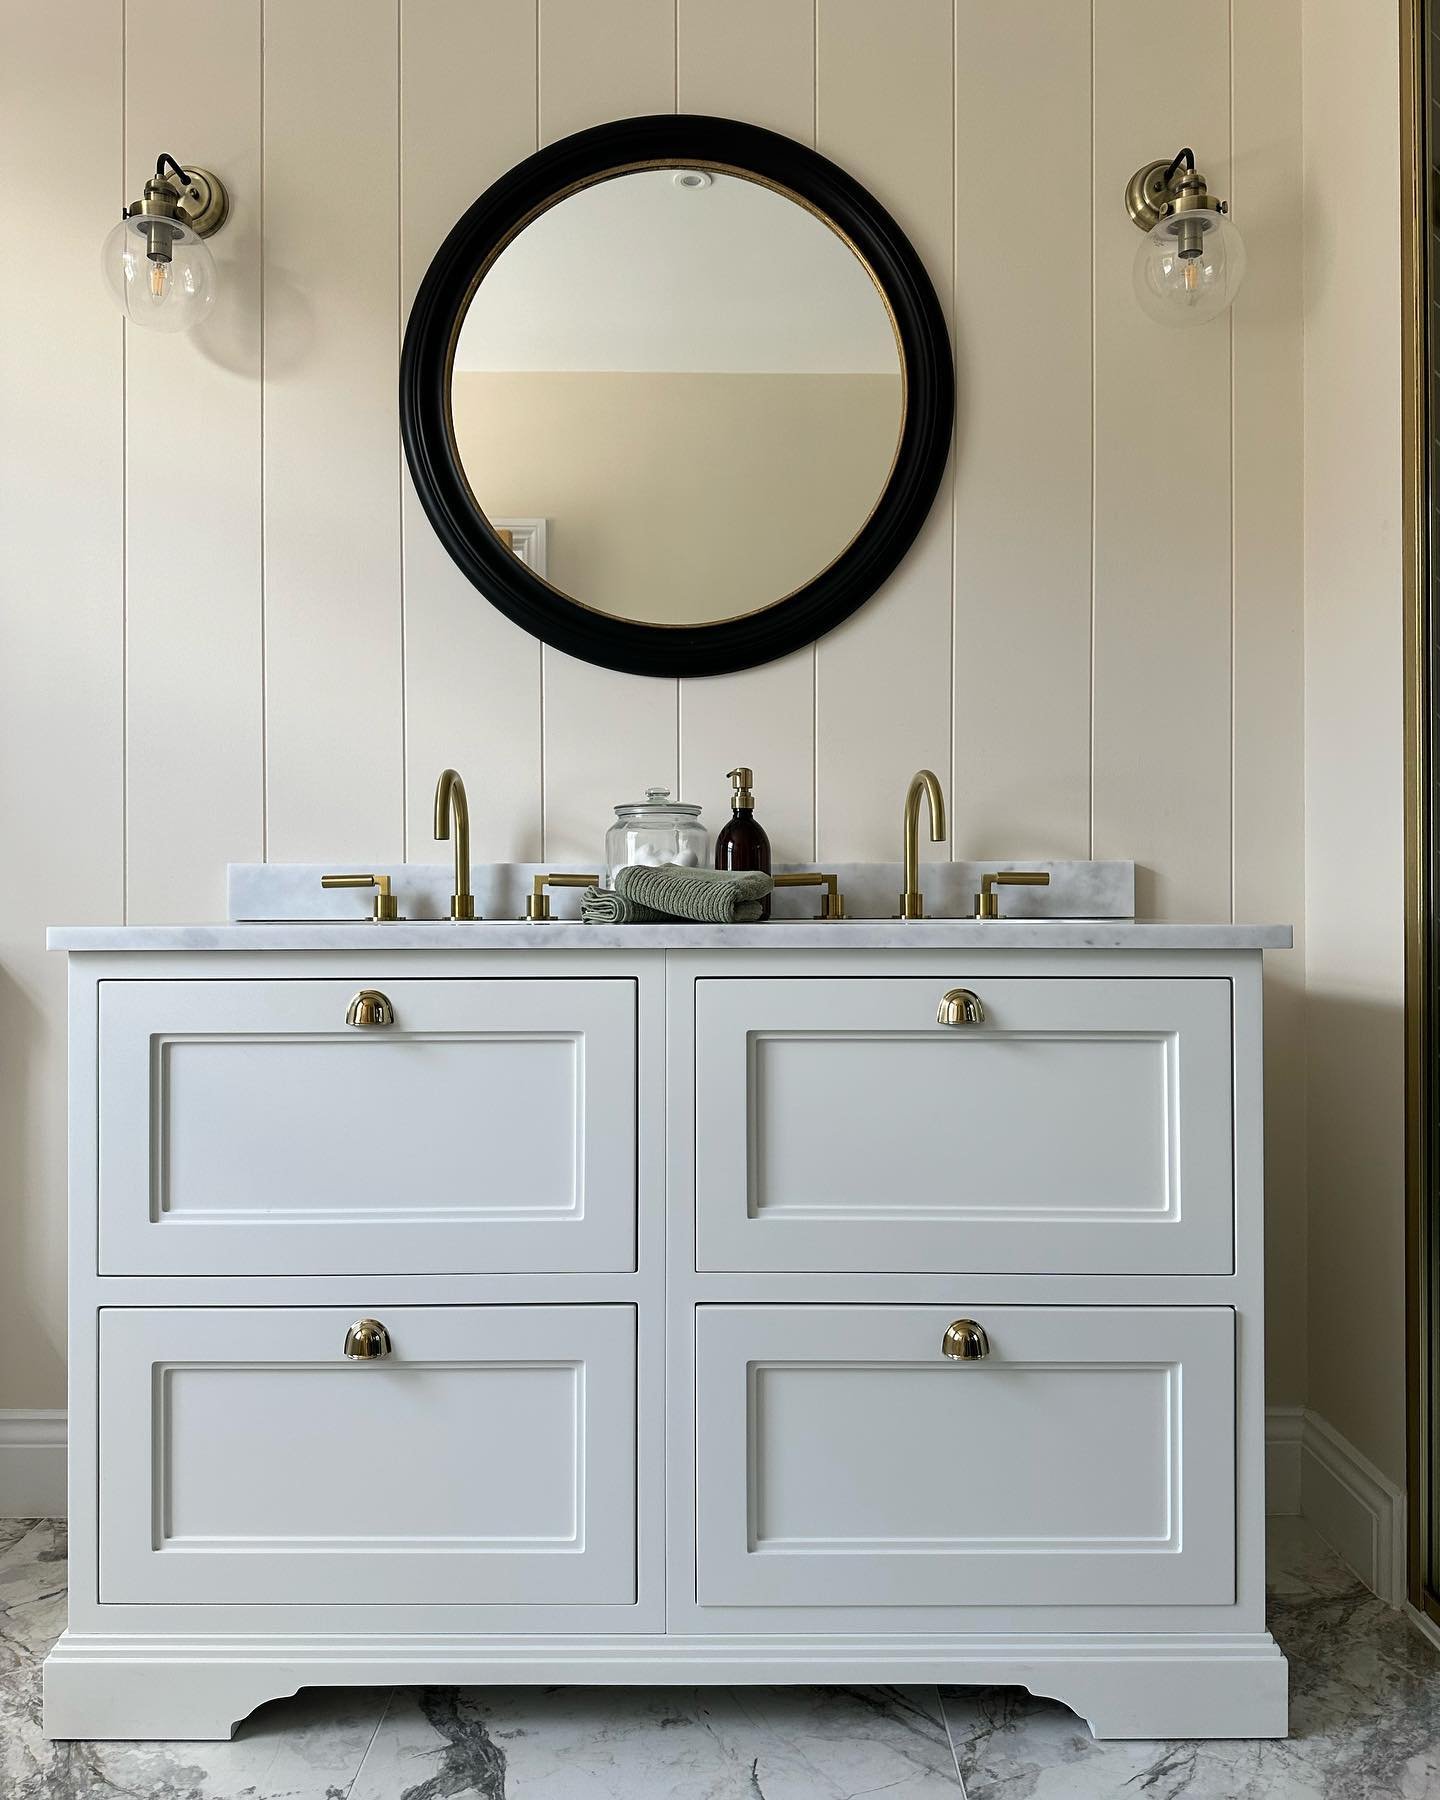 Why settle for less when you can double the luxury in your bathroom? A double basin and double shower aren&rsquo;t just about convenience, they&rsquo;re about creating a space where routine transforms into ritual. Double basins make mornings seamless